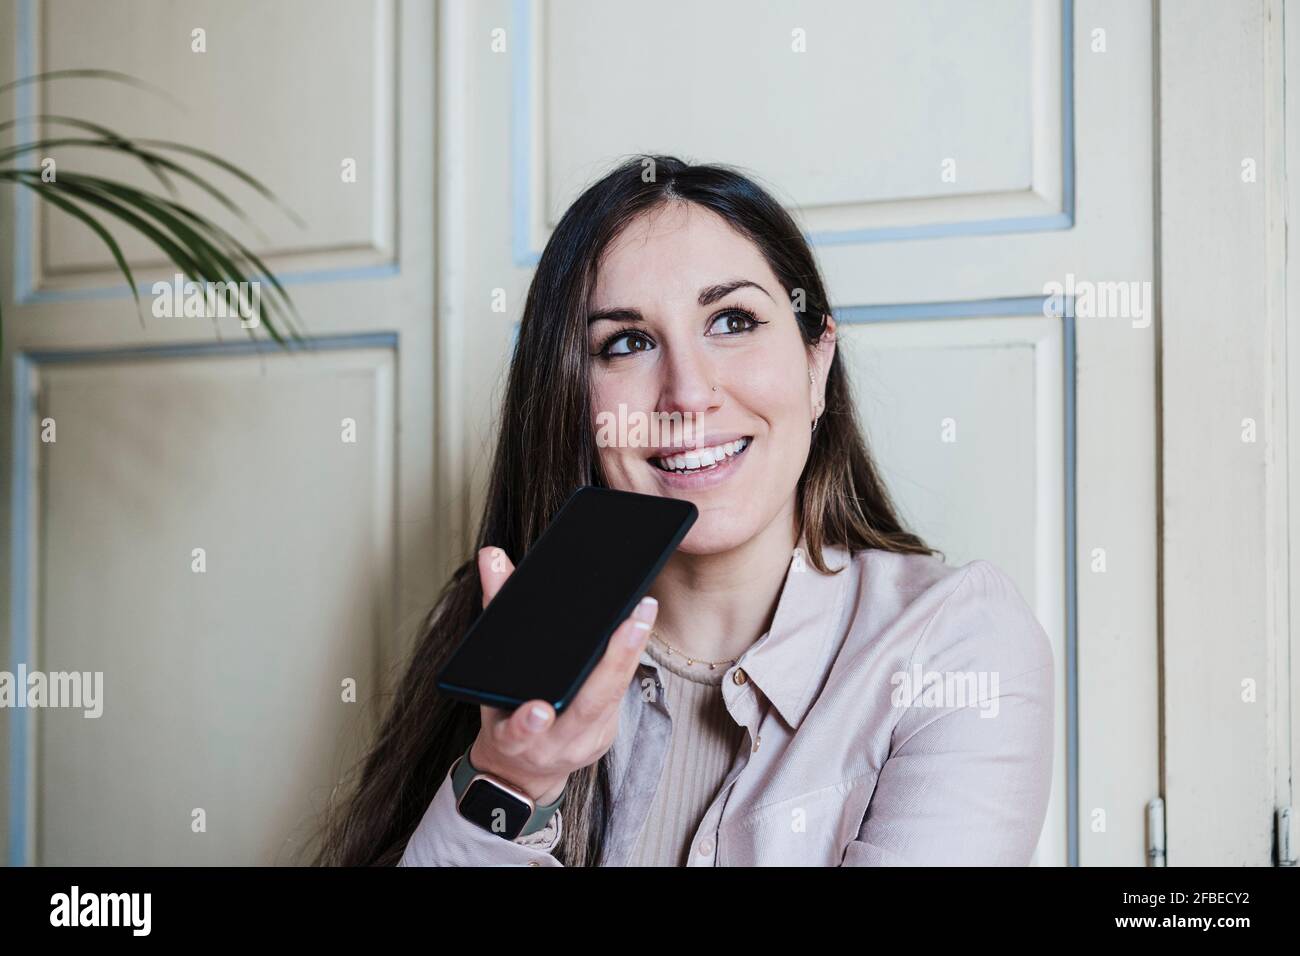 Smiling woman using smart phone to send voice messages at home Stock Photo